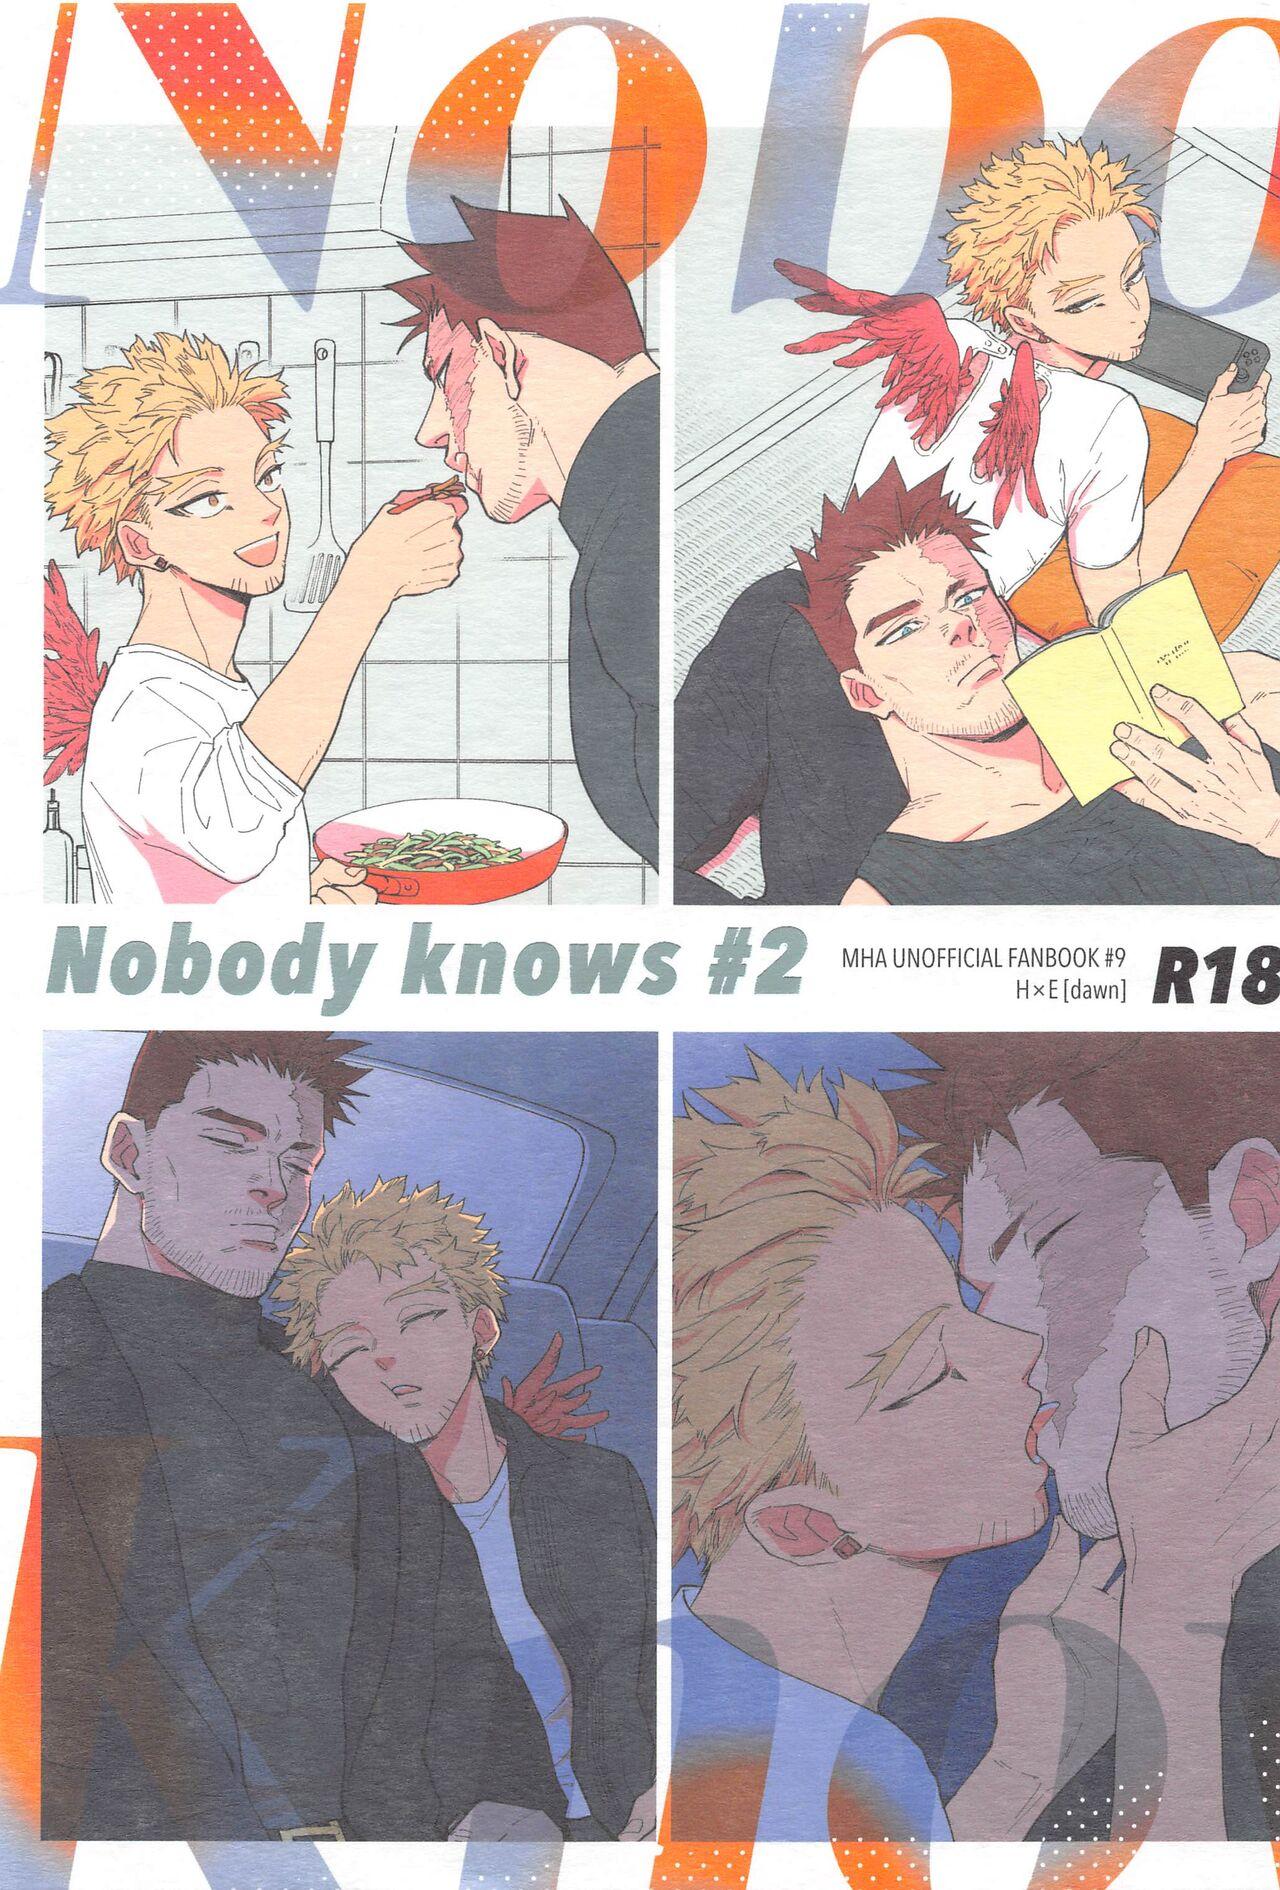 Nobody knows #2 0